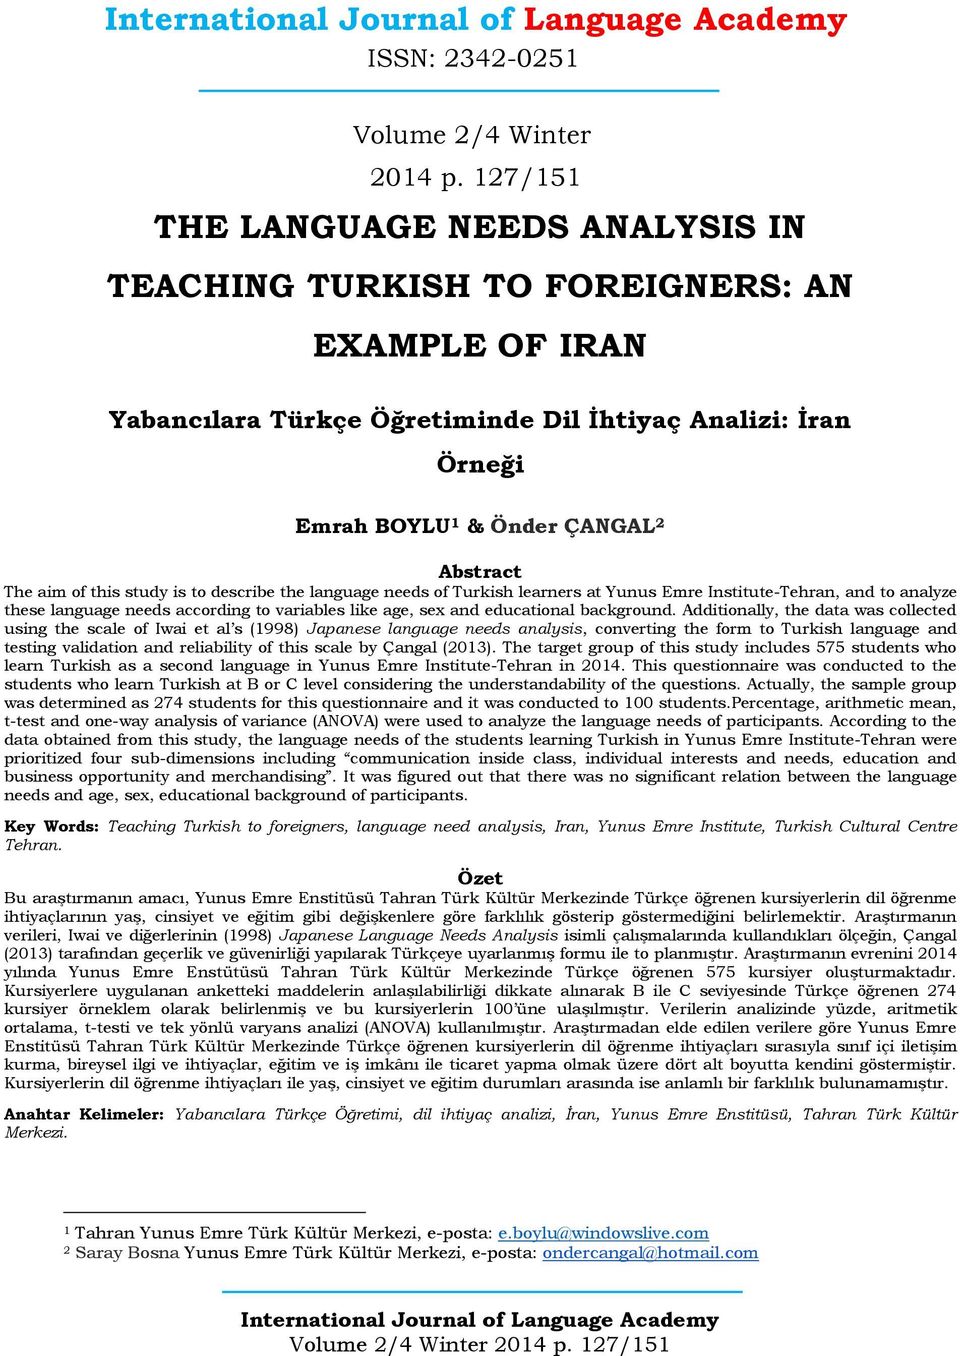 aim of this study is to describe the language needs of Turkish learners at Yunus Emre Institute-Tehran, and to analyze these language needs according to variables like age, sex and educational